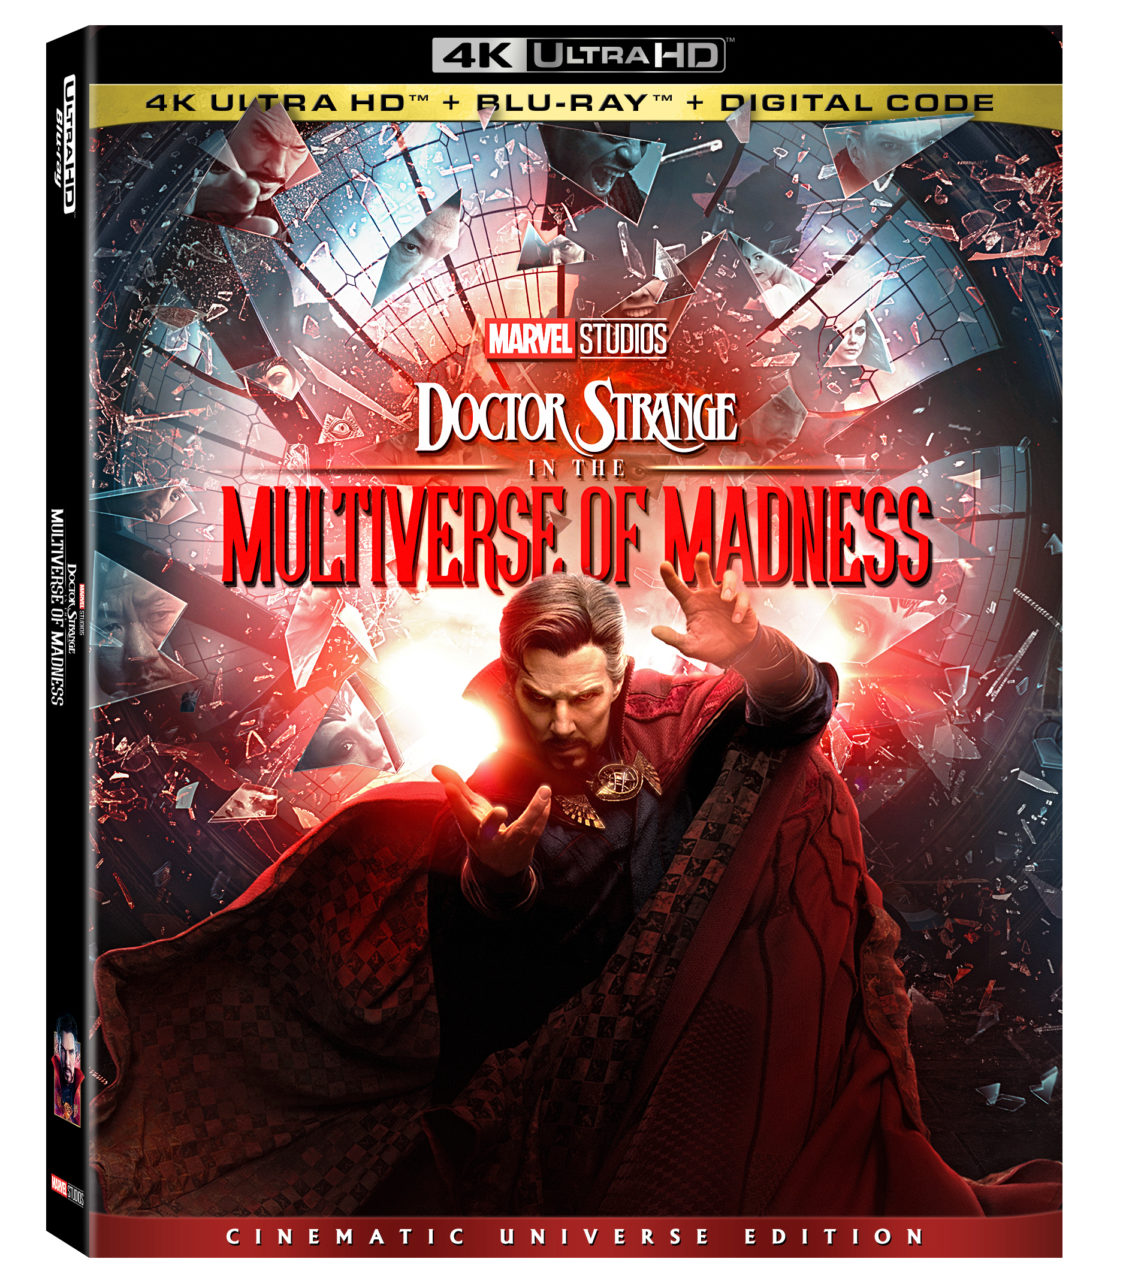 Doctor Strange In The Multiverse Of Madness 4K Ultra HD Combo Pack cover (Walt Disney Studios Home Entertainment)